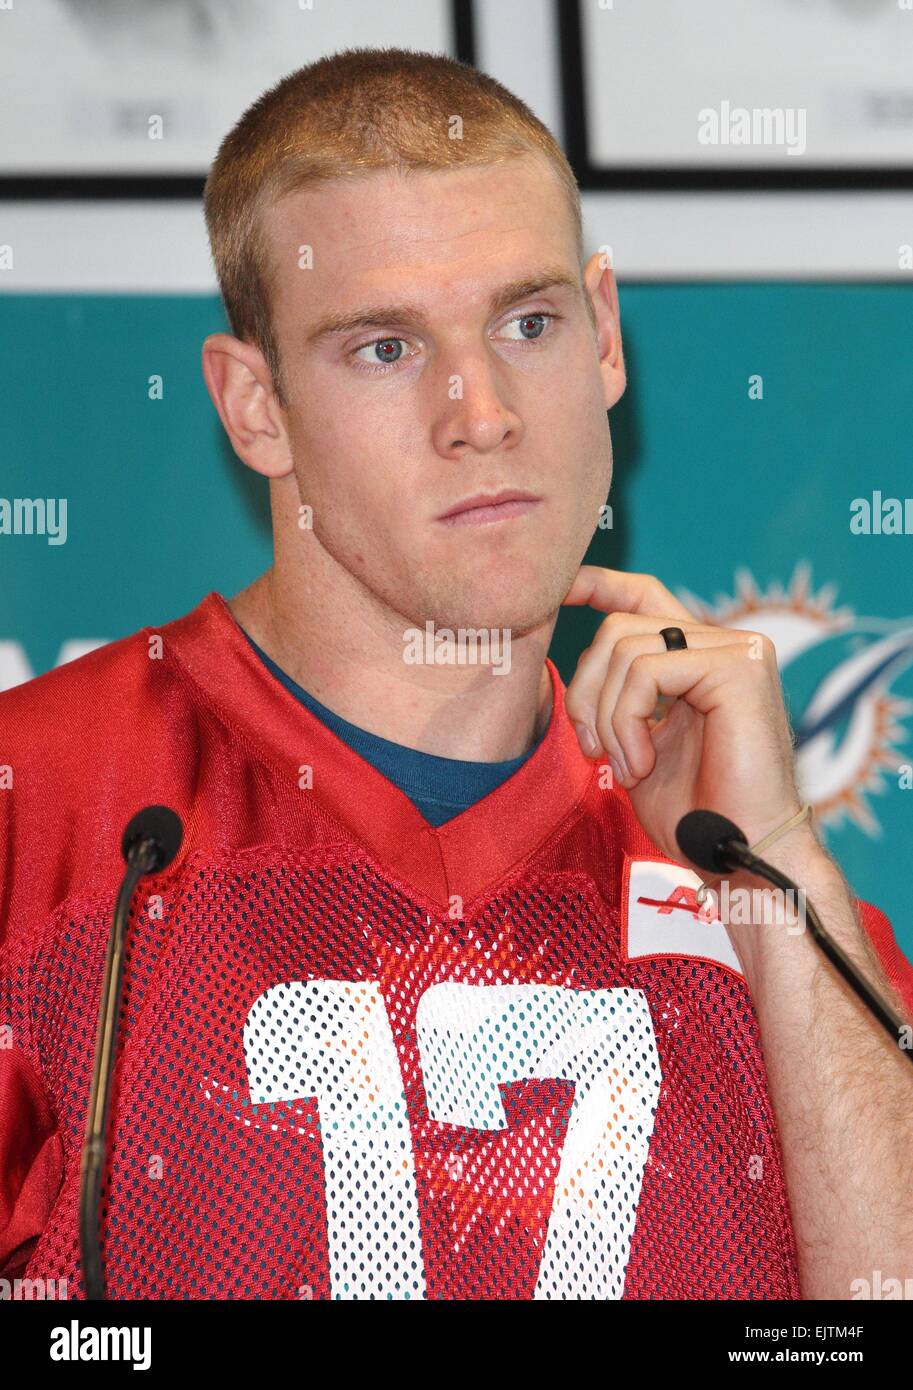 Miami Dolphins Press Conference and Practice at Saracens Rugby Club, North London. Miami jetted in early Friday and are here to play in the latest NFL International Series game at Wembley Stadium on Sunday vs Oakland Rider Featuring: Ryan Tannehill Where: Stock Photo